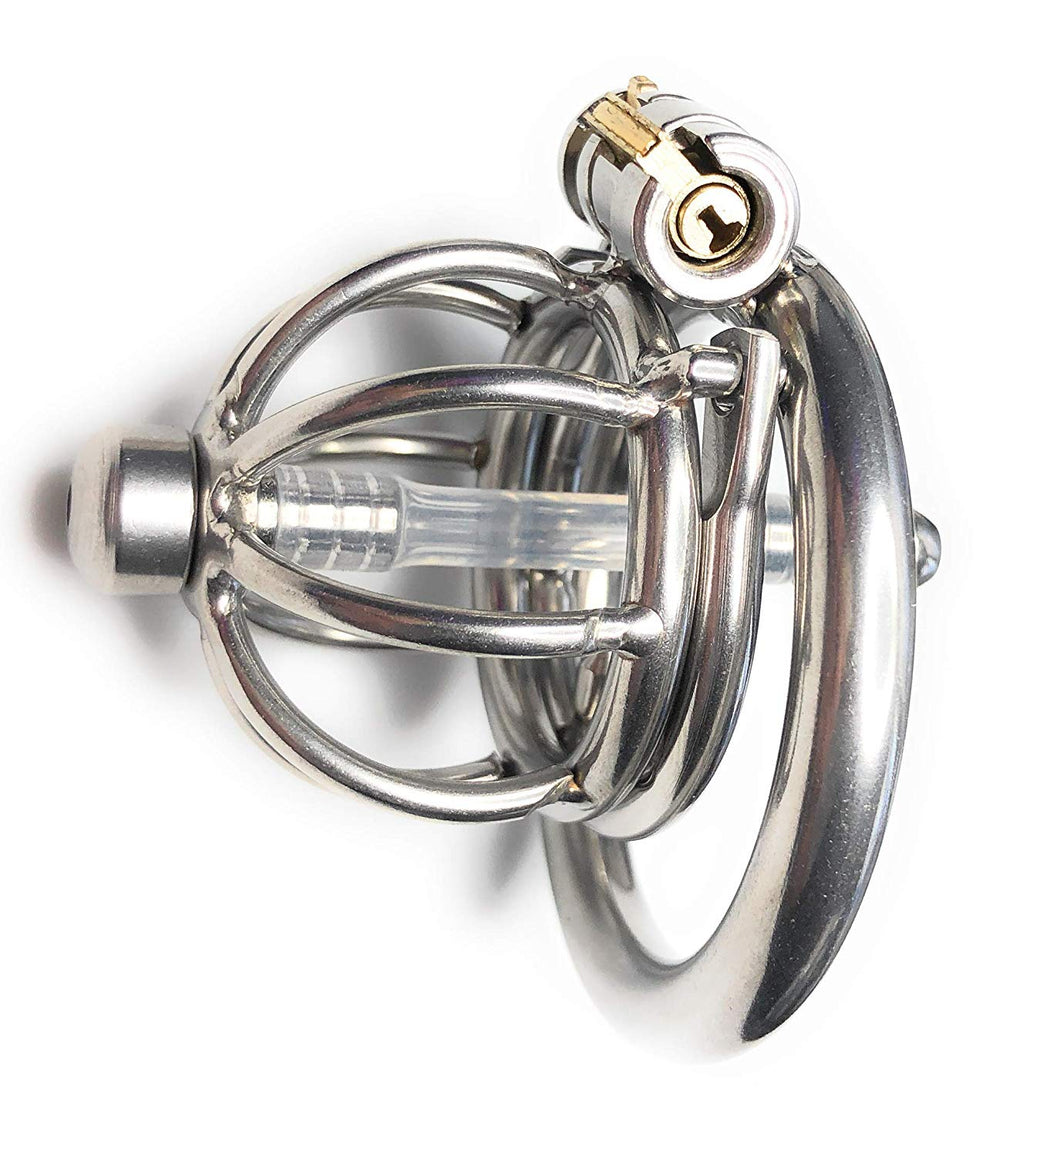 Extreme Male Chastity Device w/Removable Urethra Tube and Anti-Pull Out Protection